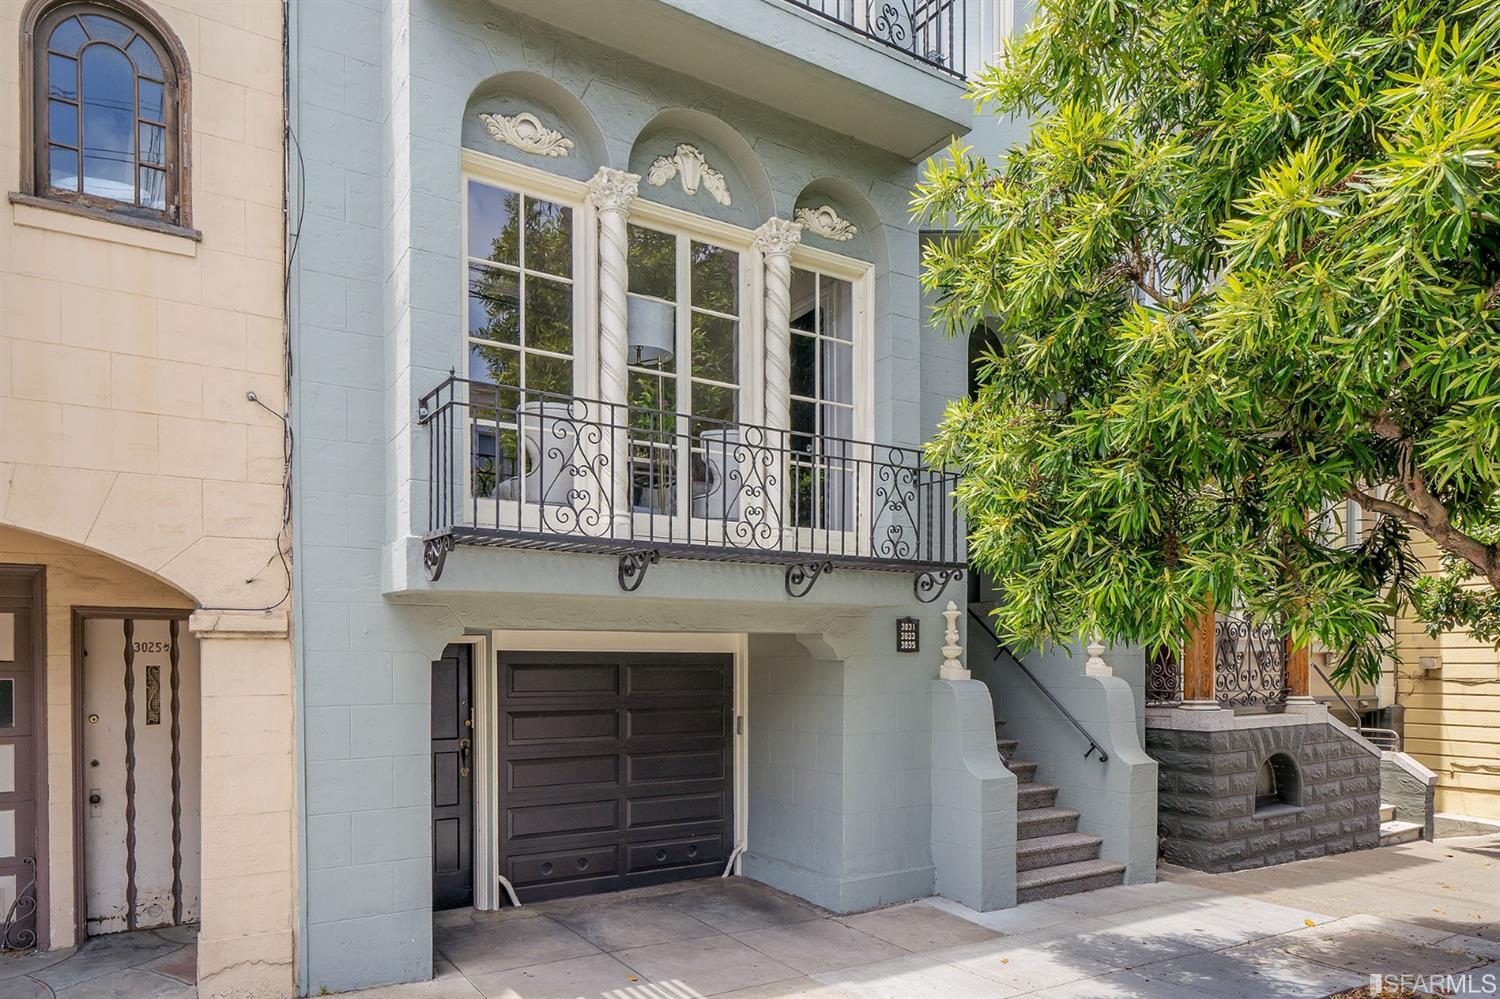 This charming Juliette balcony belongs to the front room of 3031 Octavia.